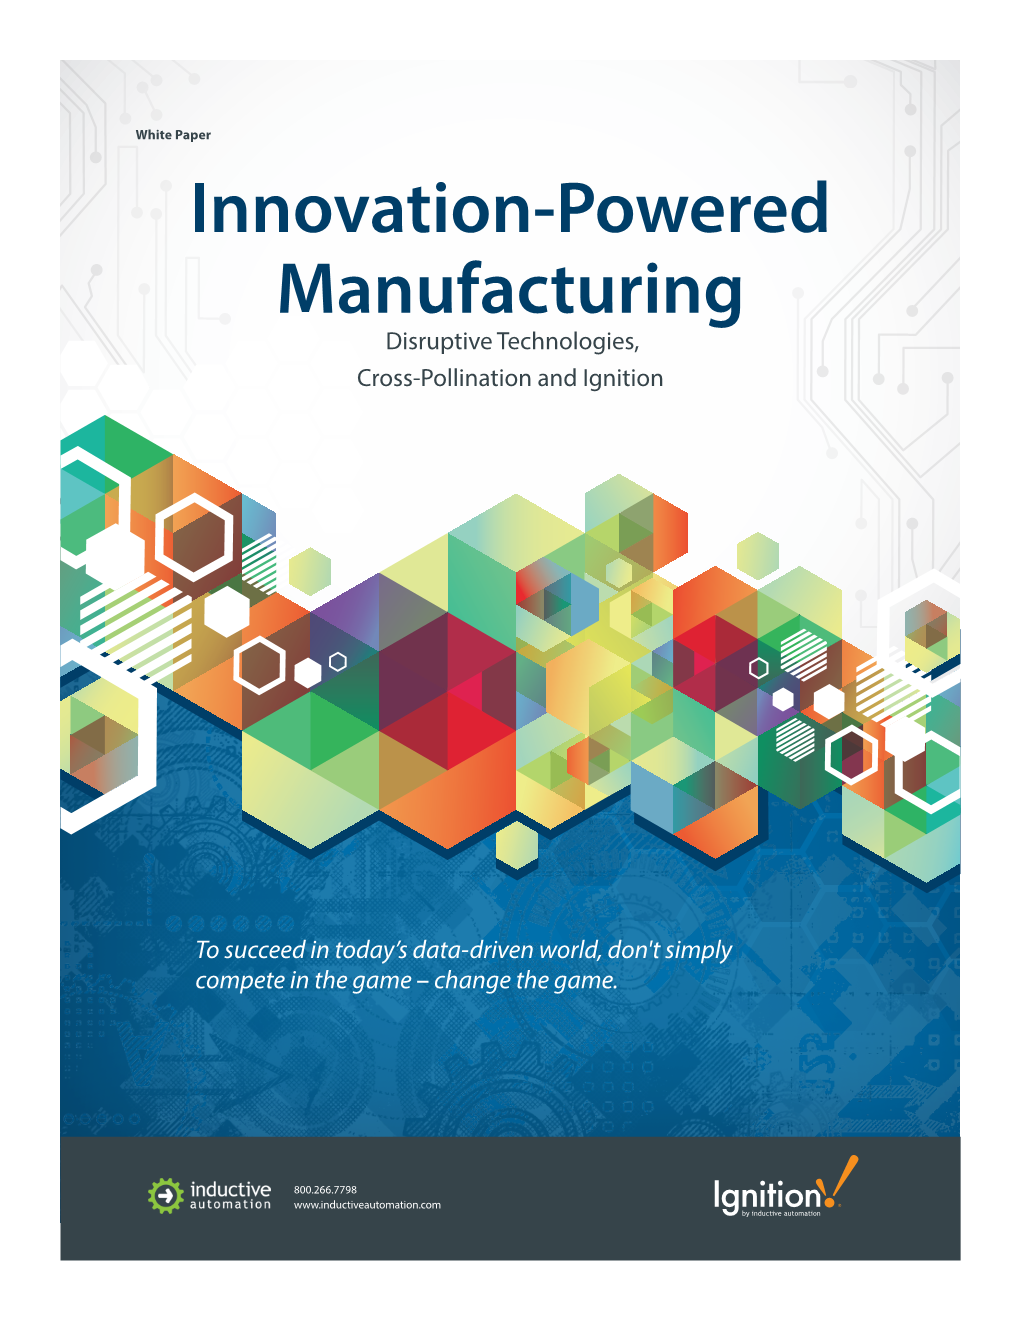 Innovation-Powered Manufacturing Disruptive Technologies, Cross-Pollination and Ignition